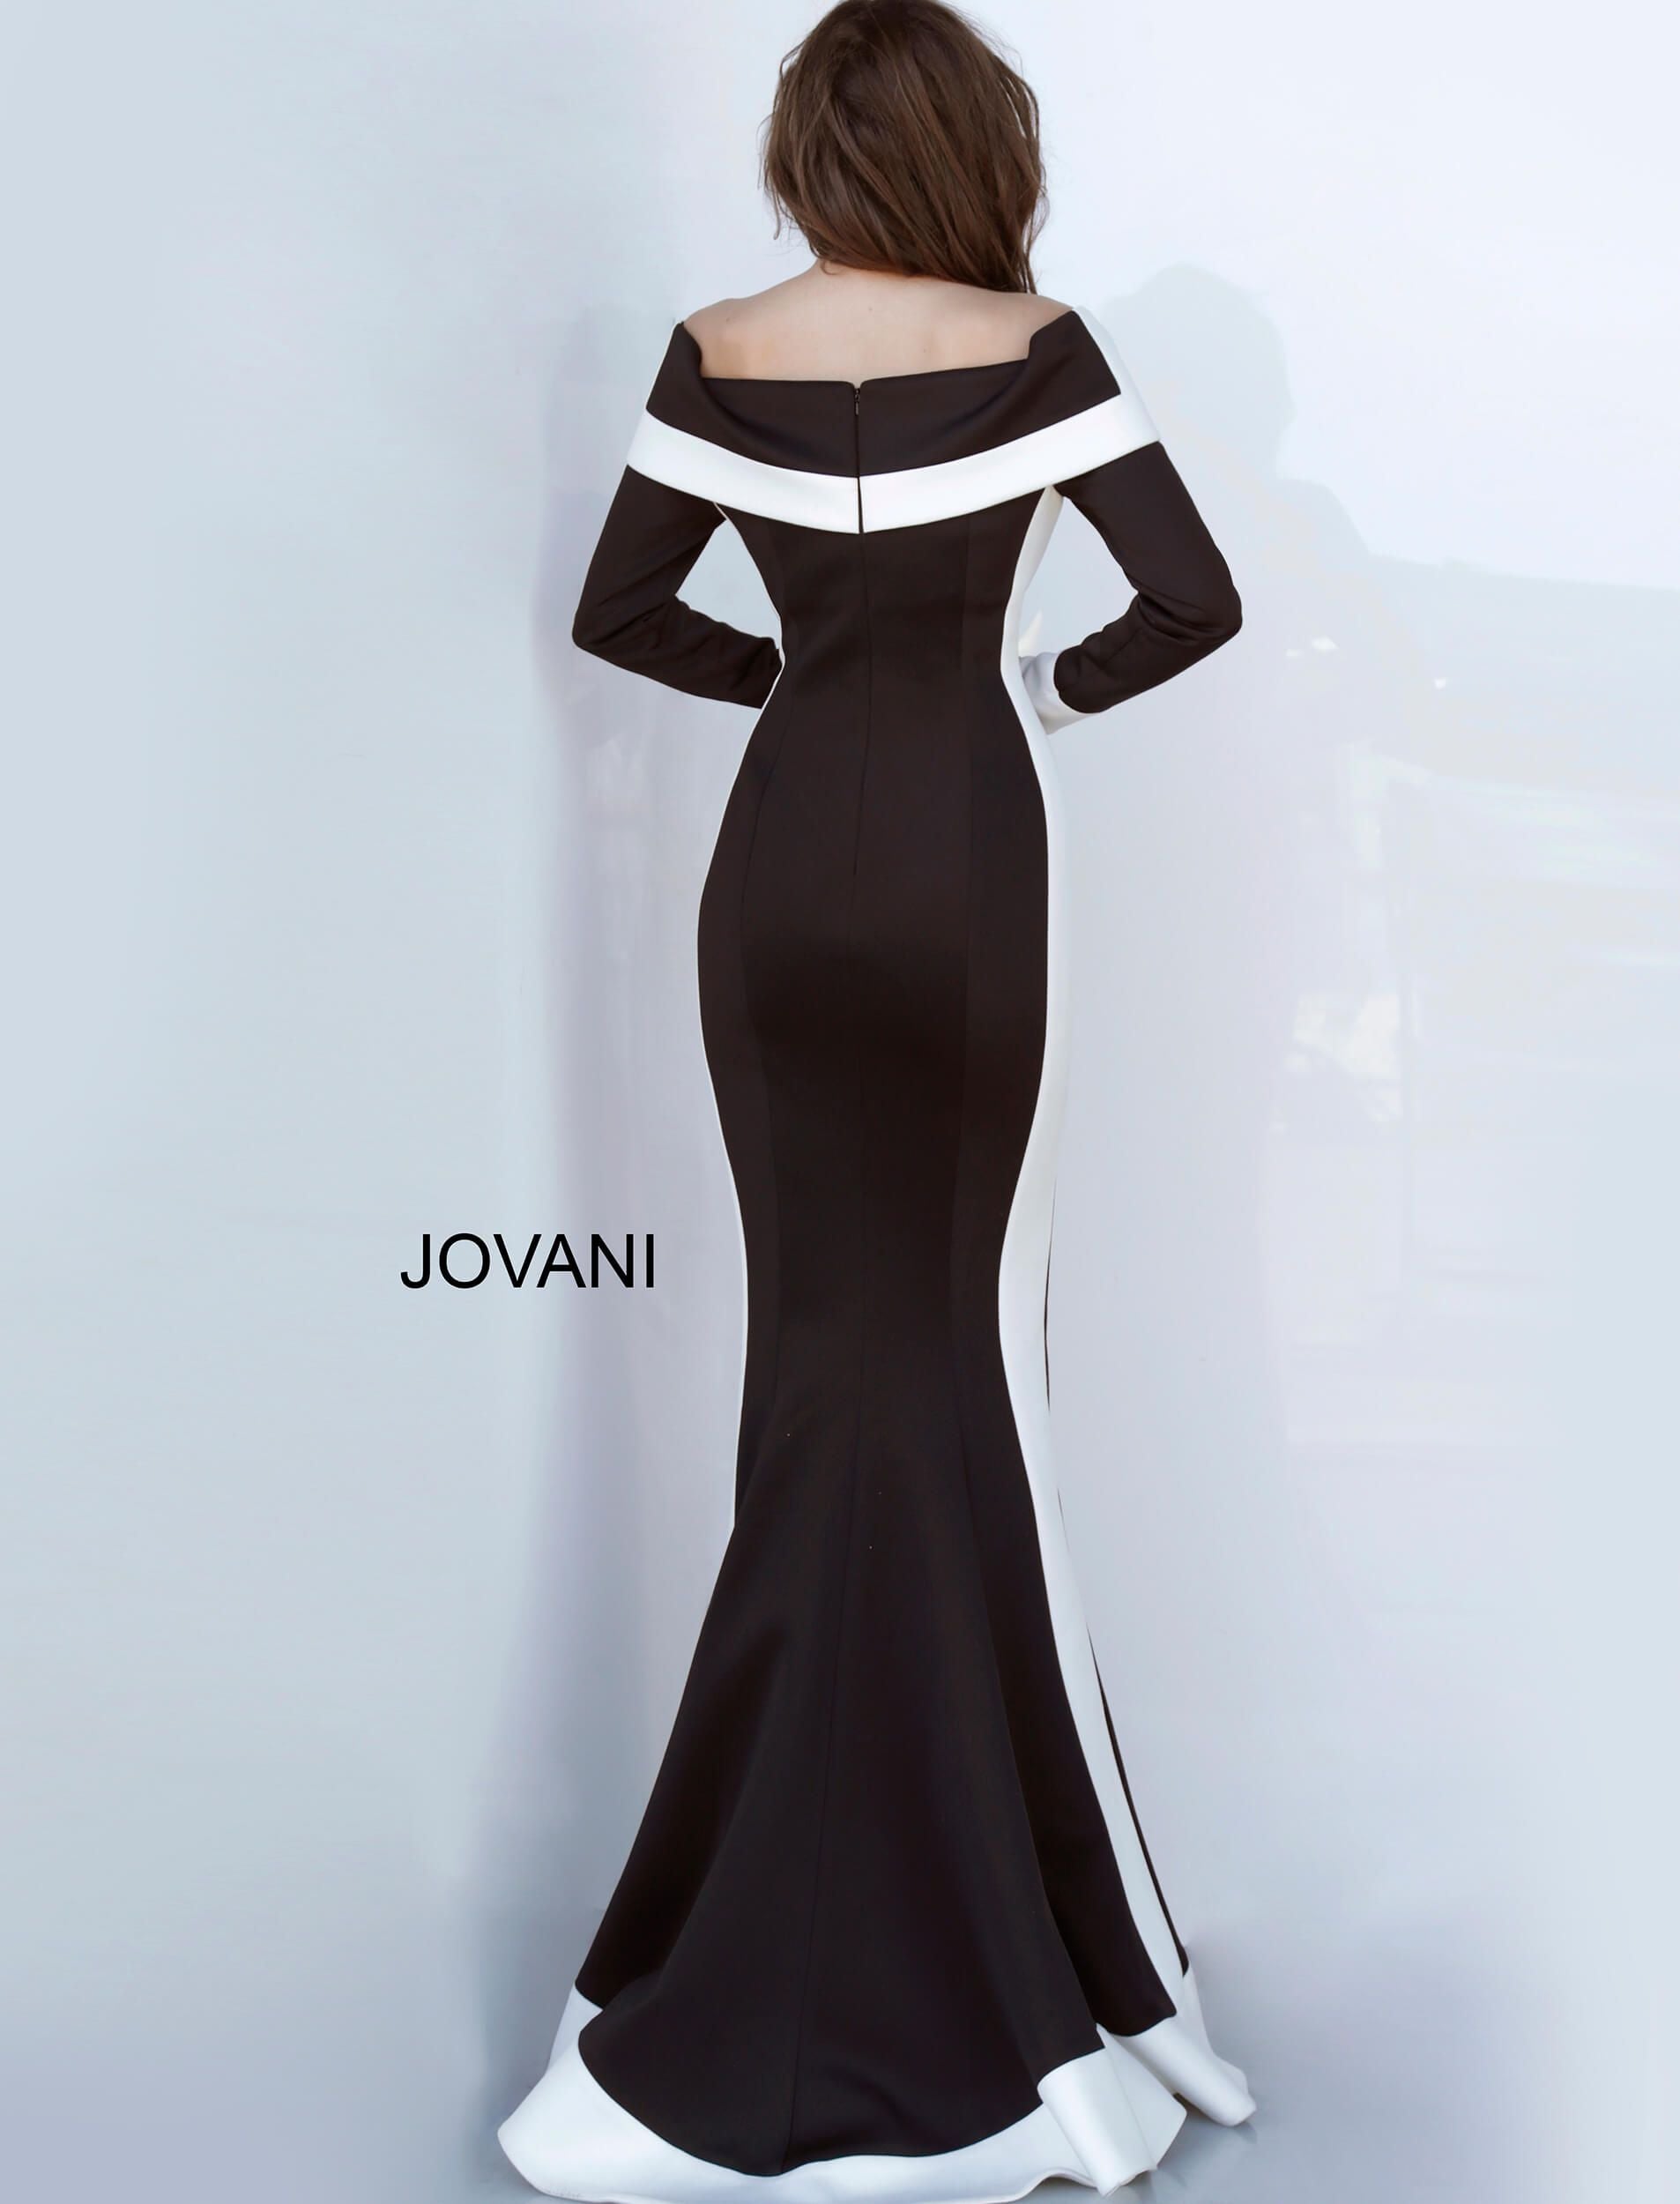 Jovani 4062 off the shoulder long sleeve black and white evening gown Black and white stripe evening dress featuring a square off-the-shoulder folded neckline and long sleeve bodice, closed back with zipper closure. Floor-length bodycon skirt with a gently flared end. Available colors:  Black/White  Available sizes:  00-24